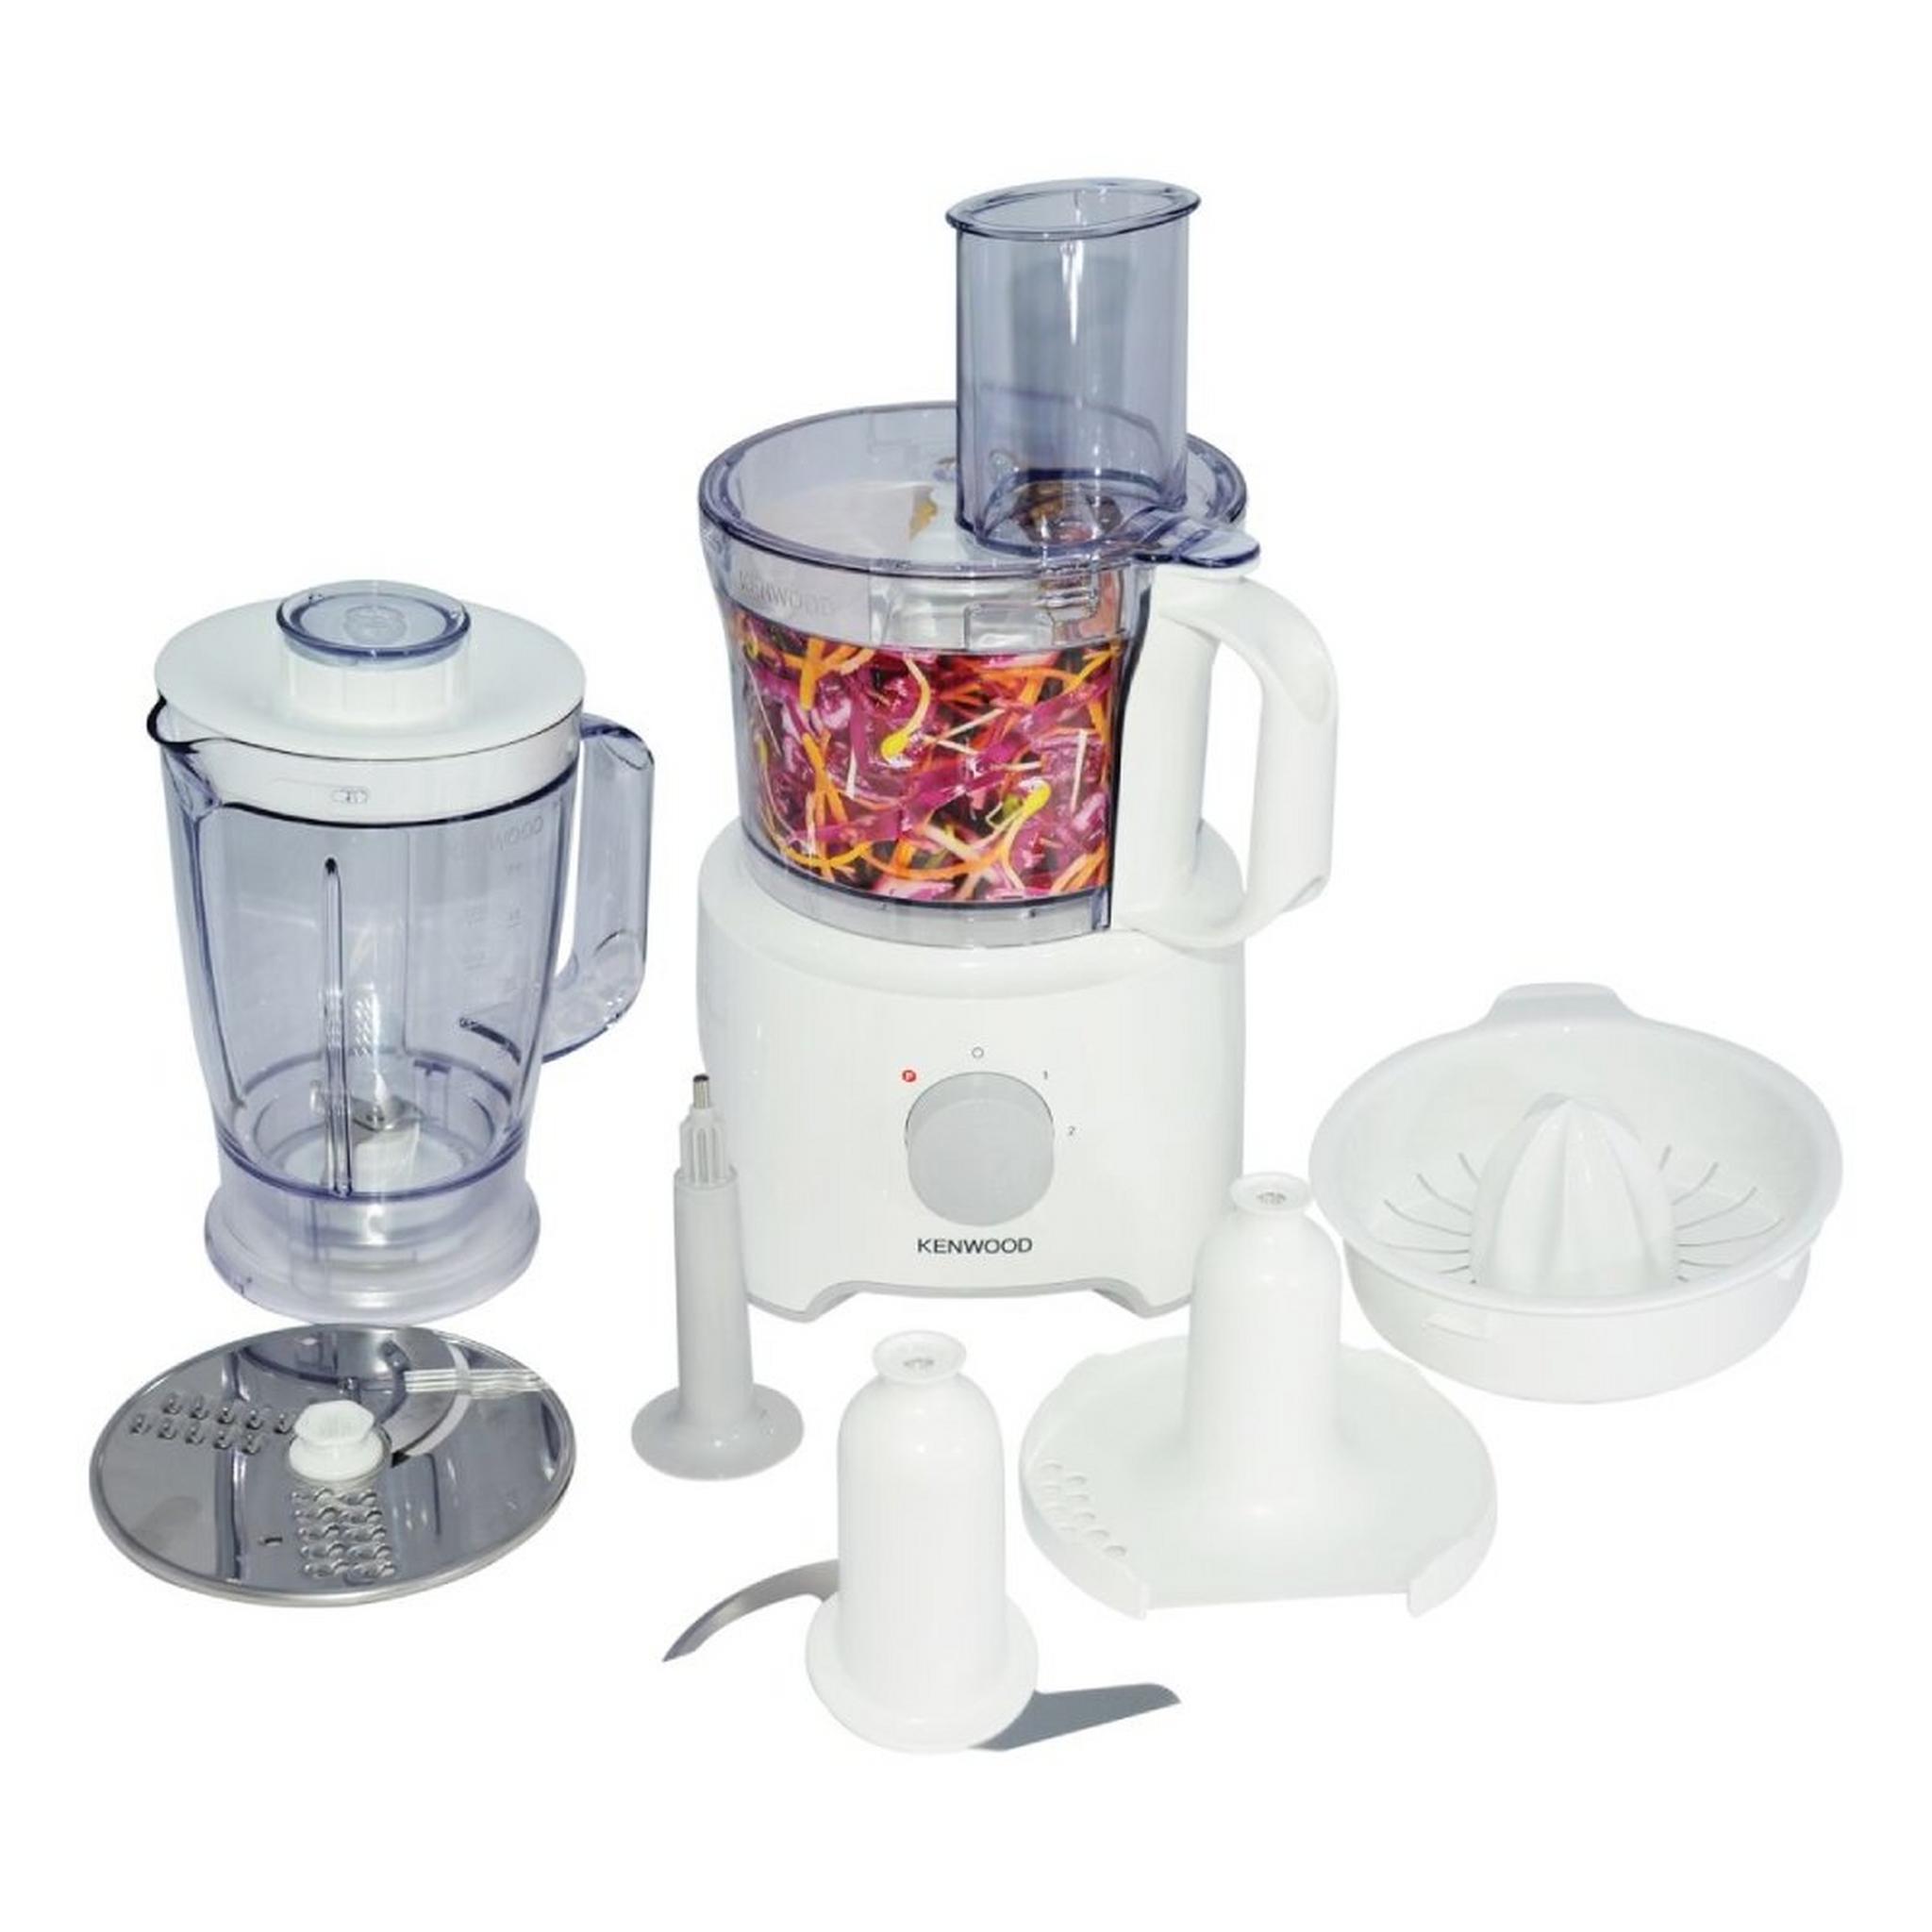 Kenwood Multipro 2.1 Liters Compact Food Processor - FDP303WH